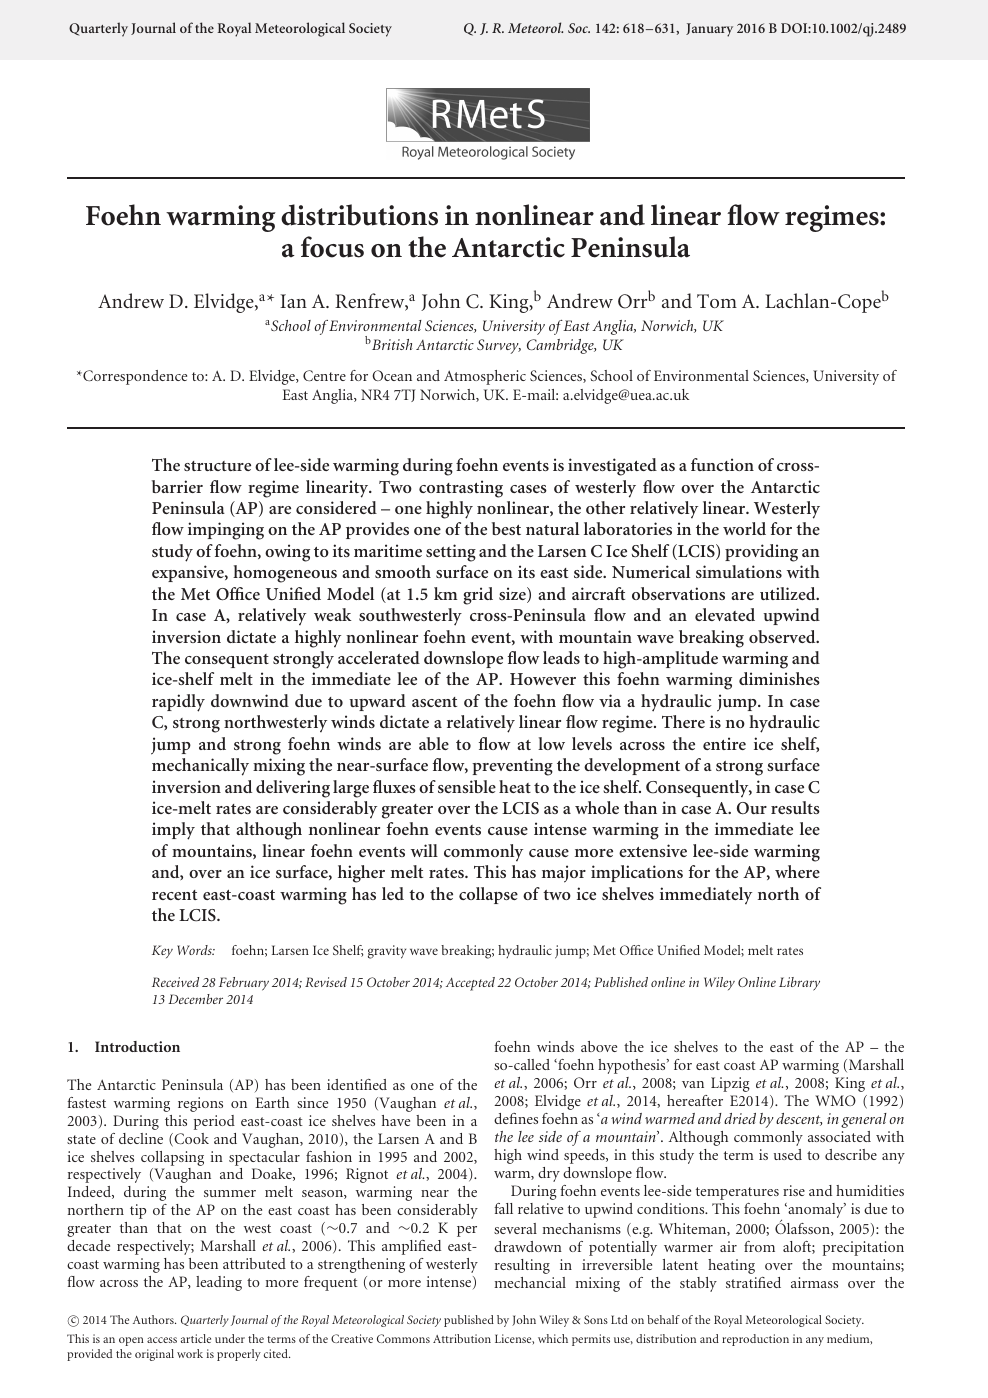 Foehn Warming Distributions In Nonlinear And Linear Flow Regimes A Focus On The Antarctic Peninsula Topic Of Research Paper In Earth And Related Environmental Sciences Download Scholarly Article Pdf And Read